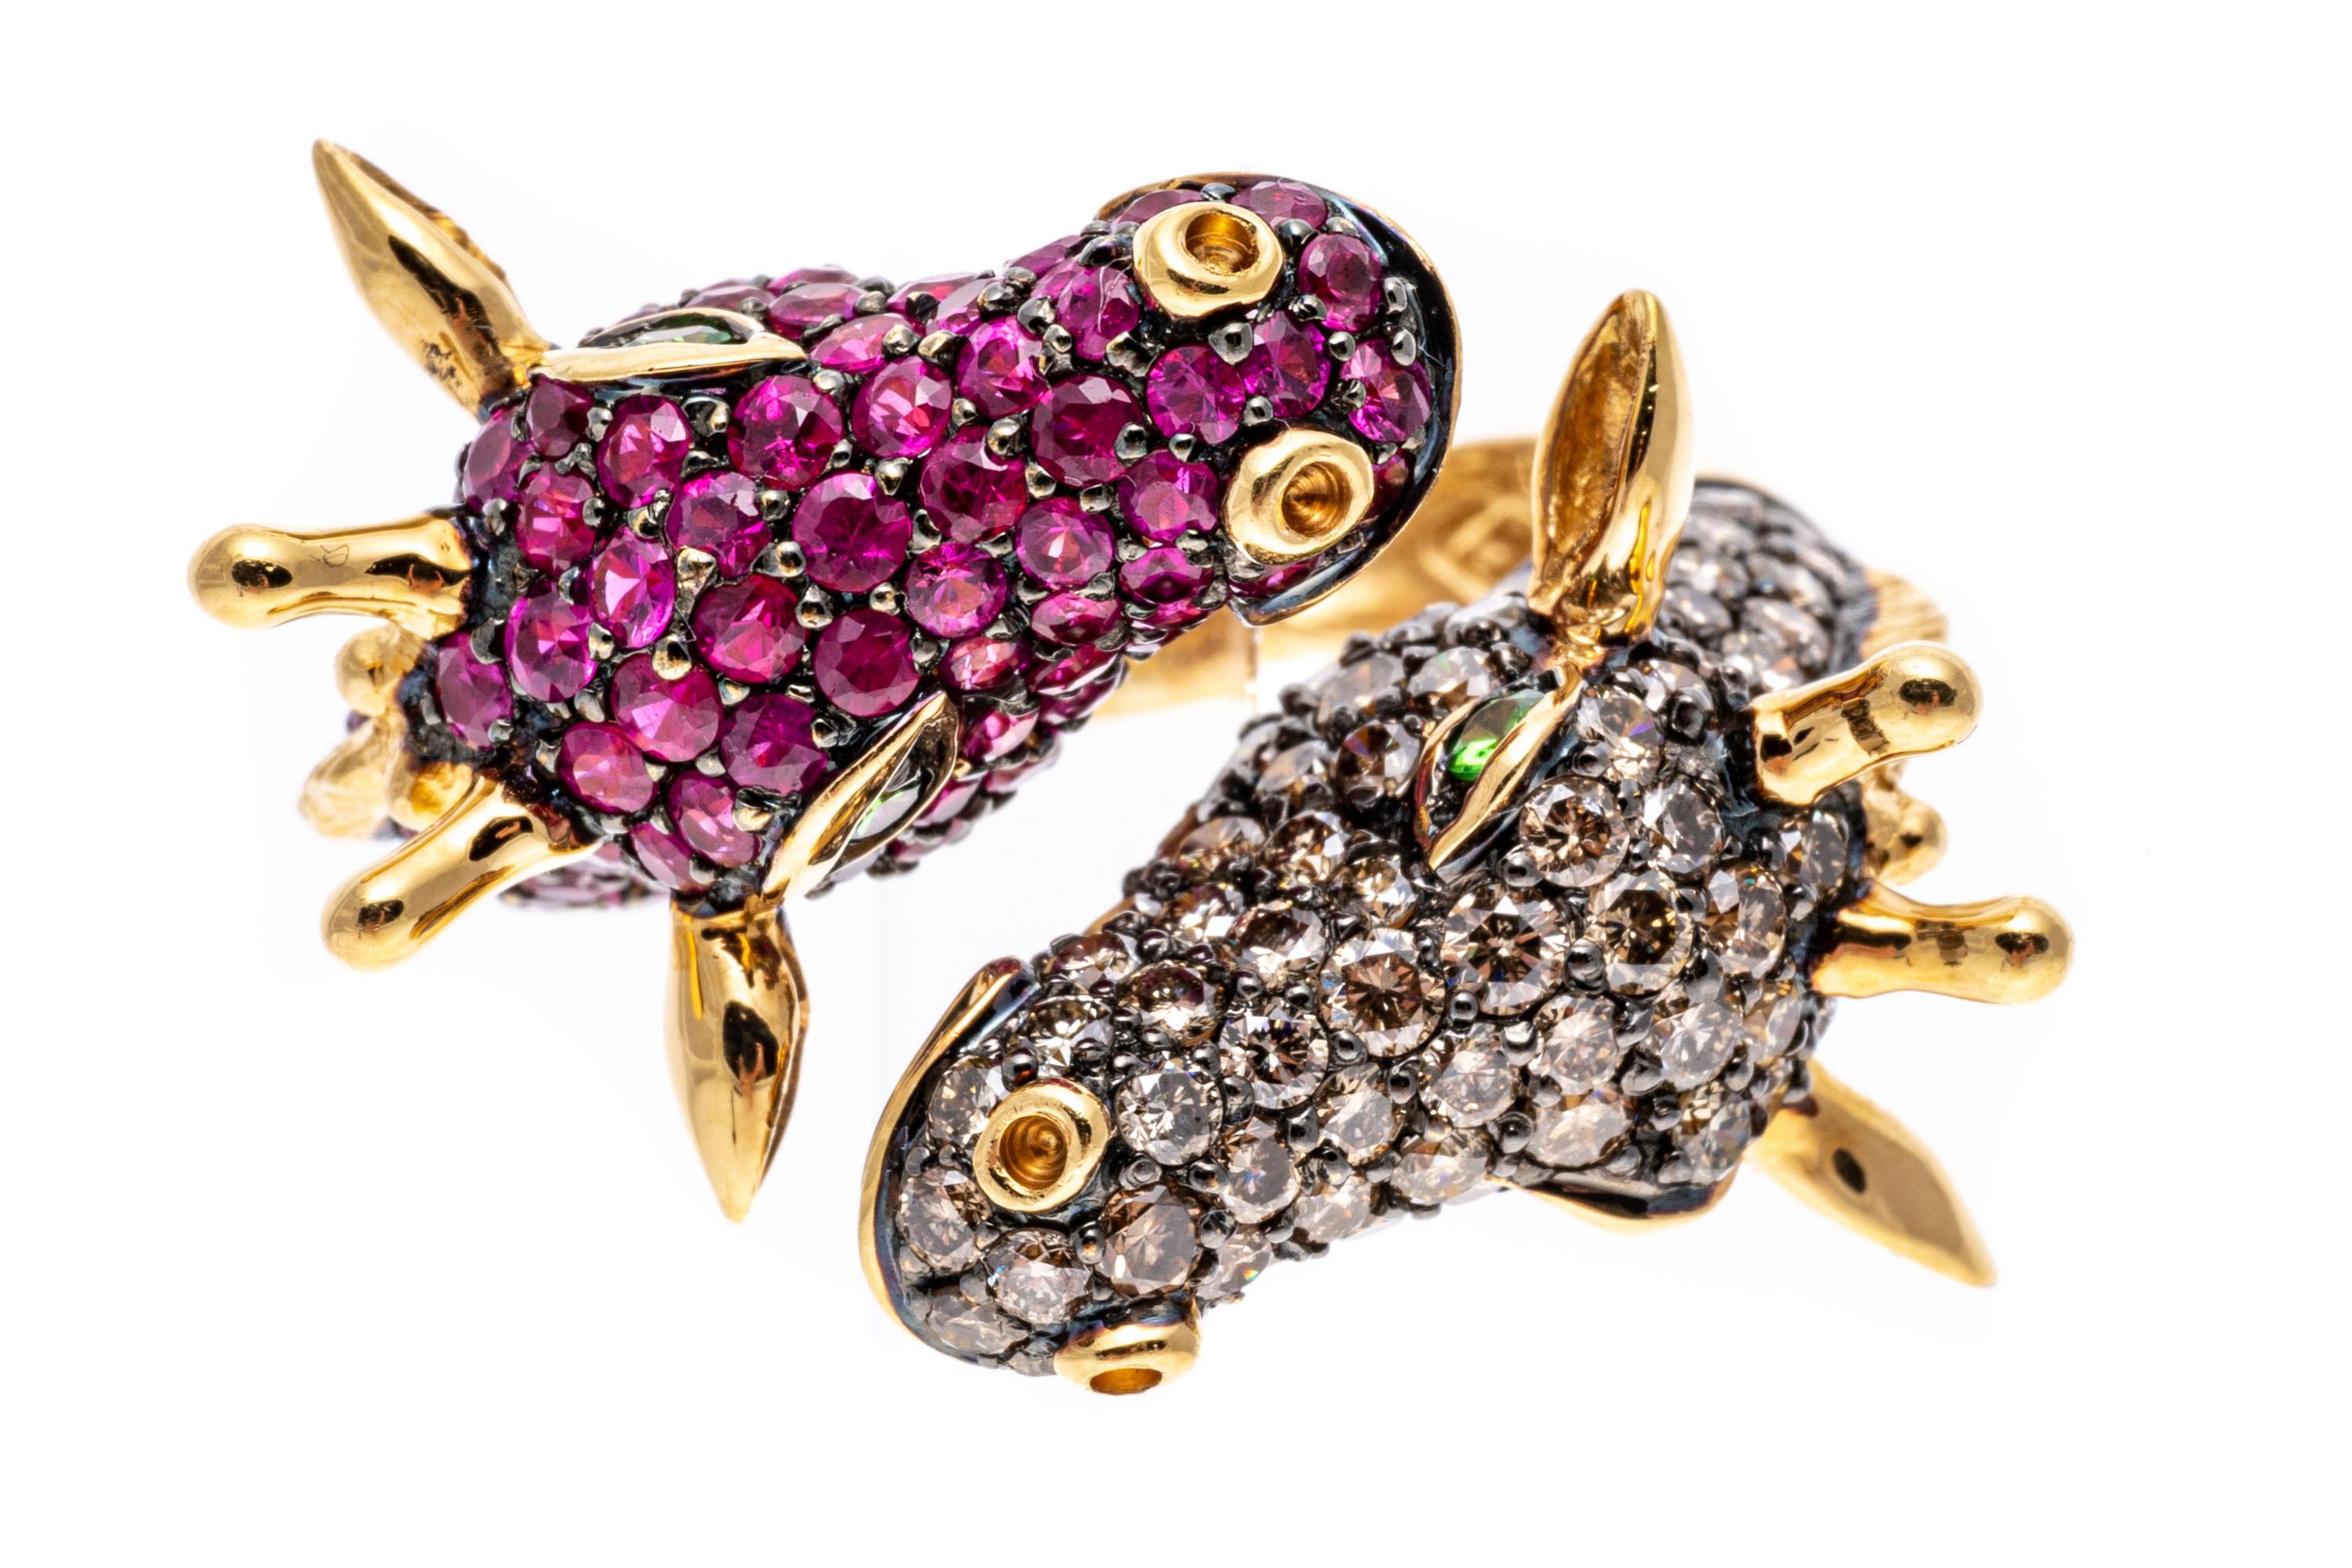 18k Gold Pave Set Cognac Diamond and Pink Sapphire Bypass Giraffes Ring For Sale 2